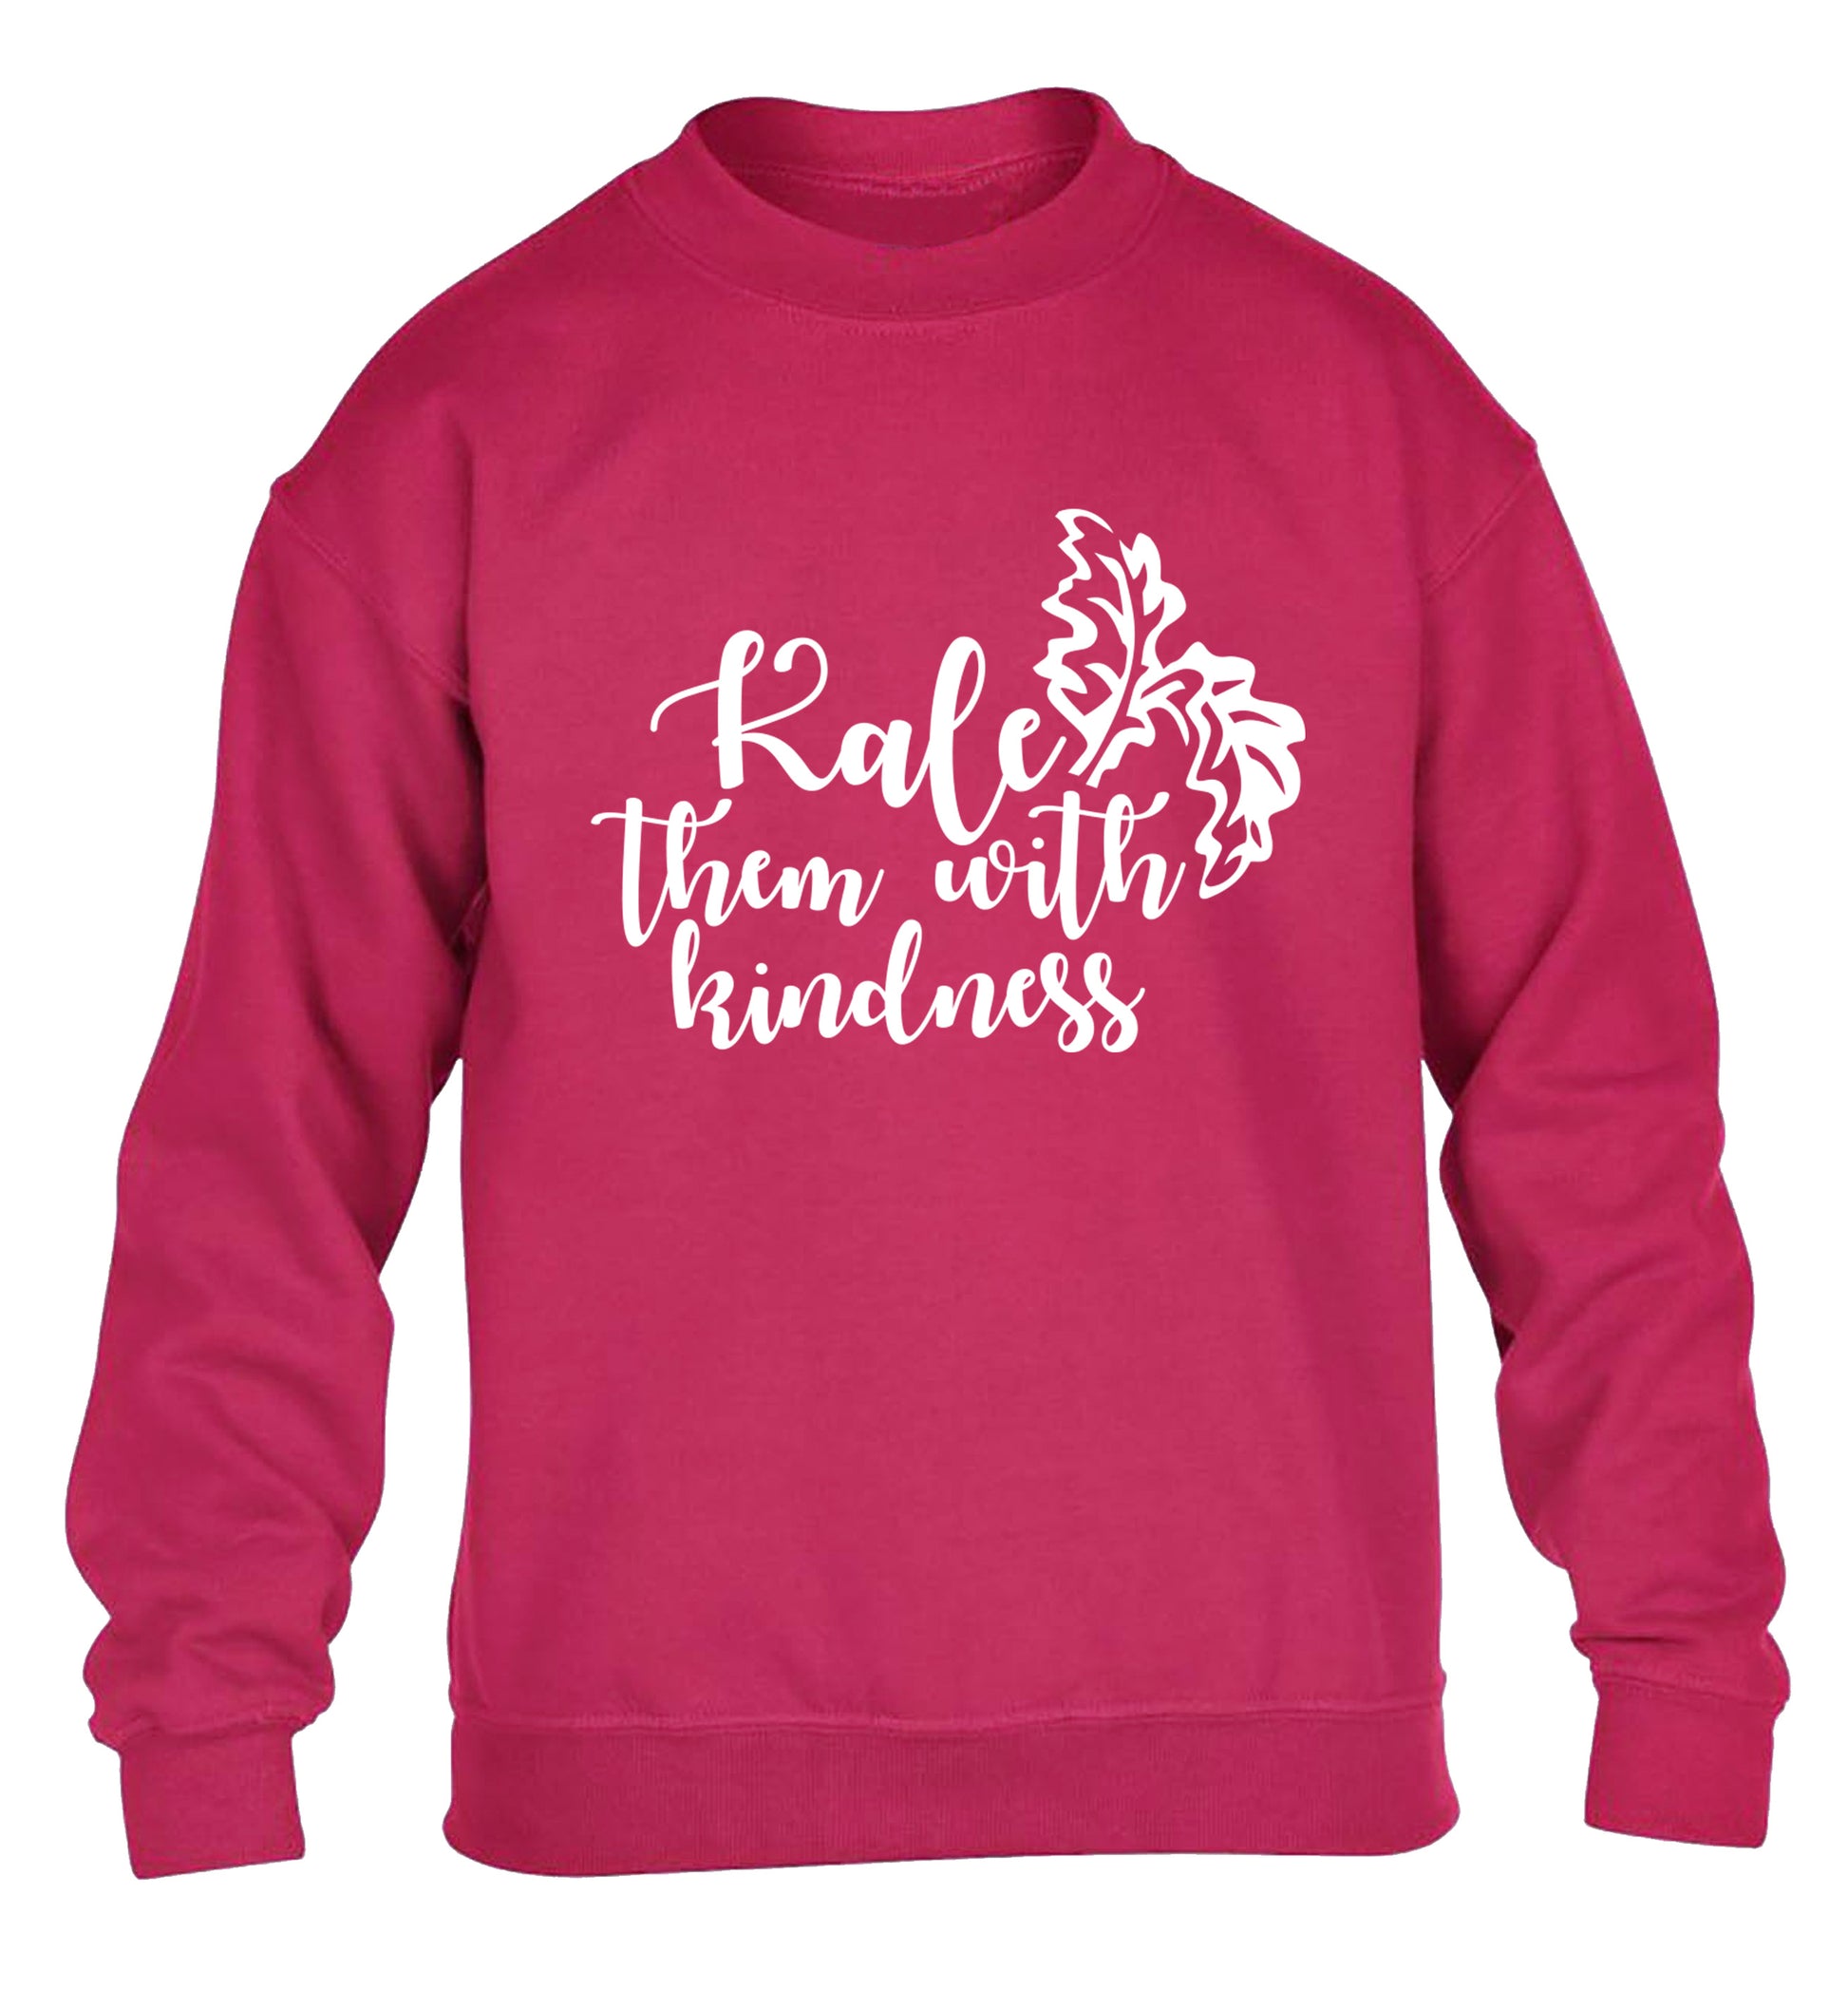 Kale them with kindness children's pink sweater 12-14 Years